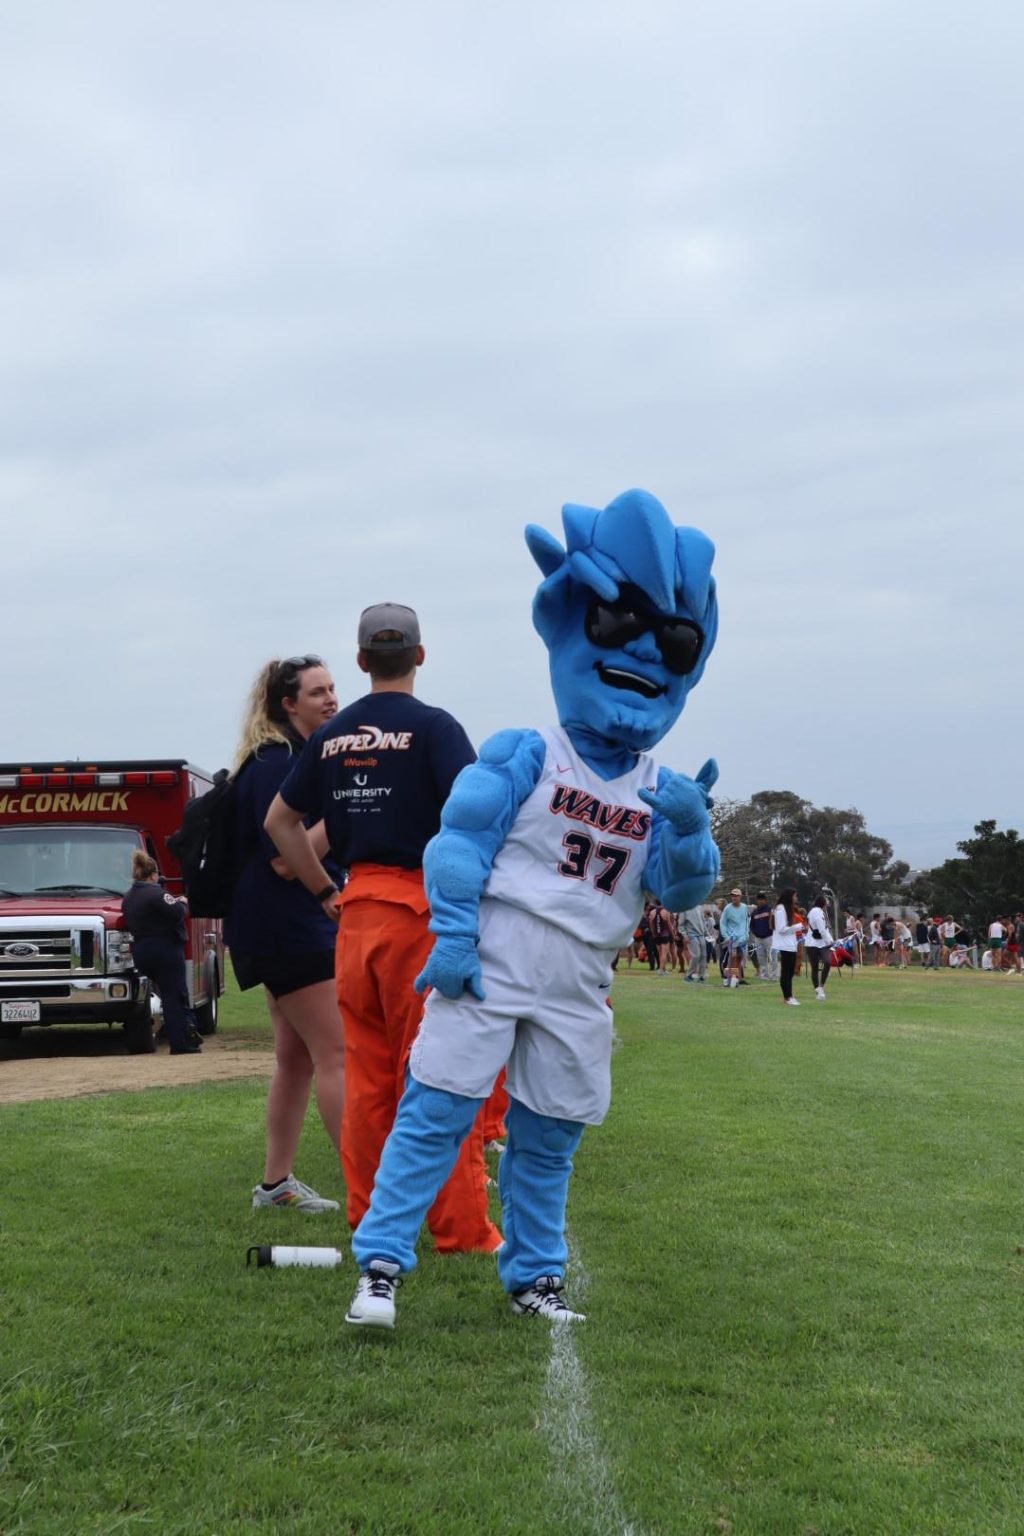 Willie the Wave poses for a picture at the Waves Invitational on Oct. 1, in Malibu. The Waves showed their overall strength in this meet, as the women's team won first place and the men's finished second.